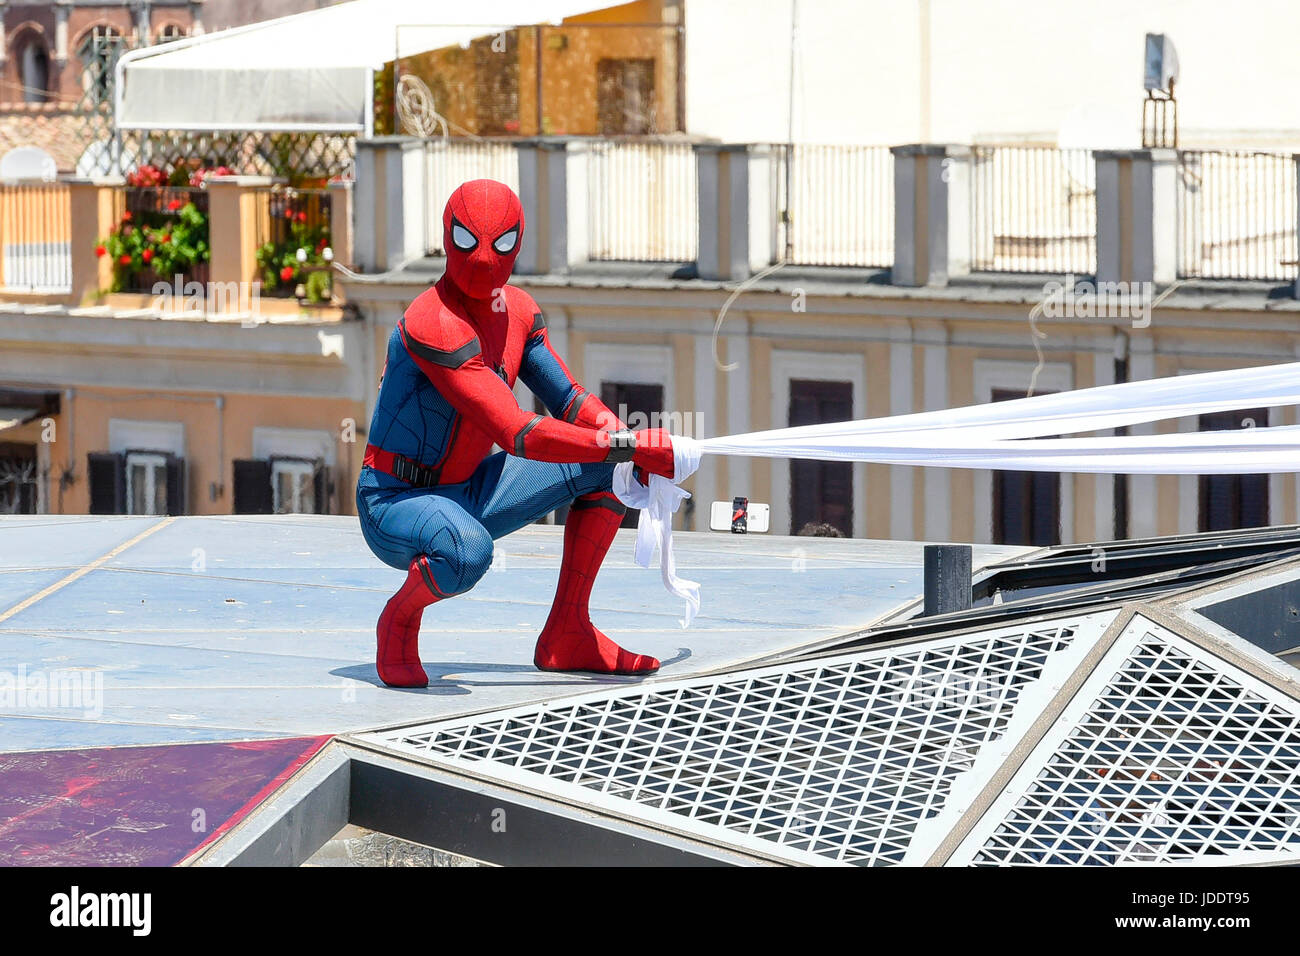 Spider-Man: Homecoming' photocall in New York - News18